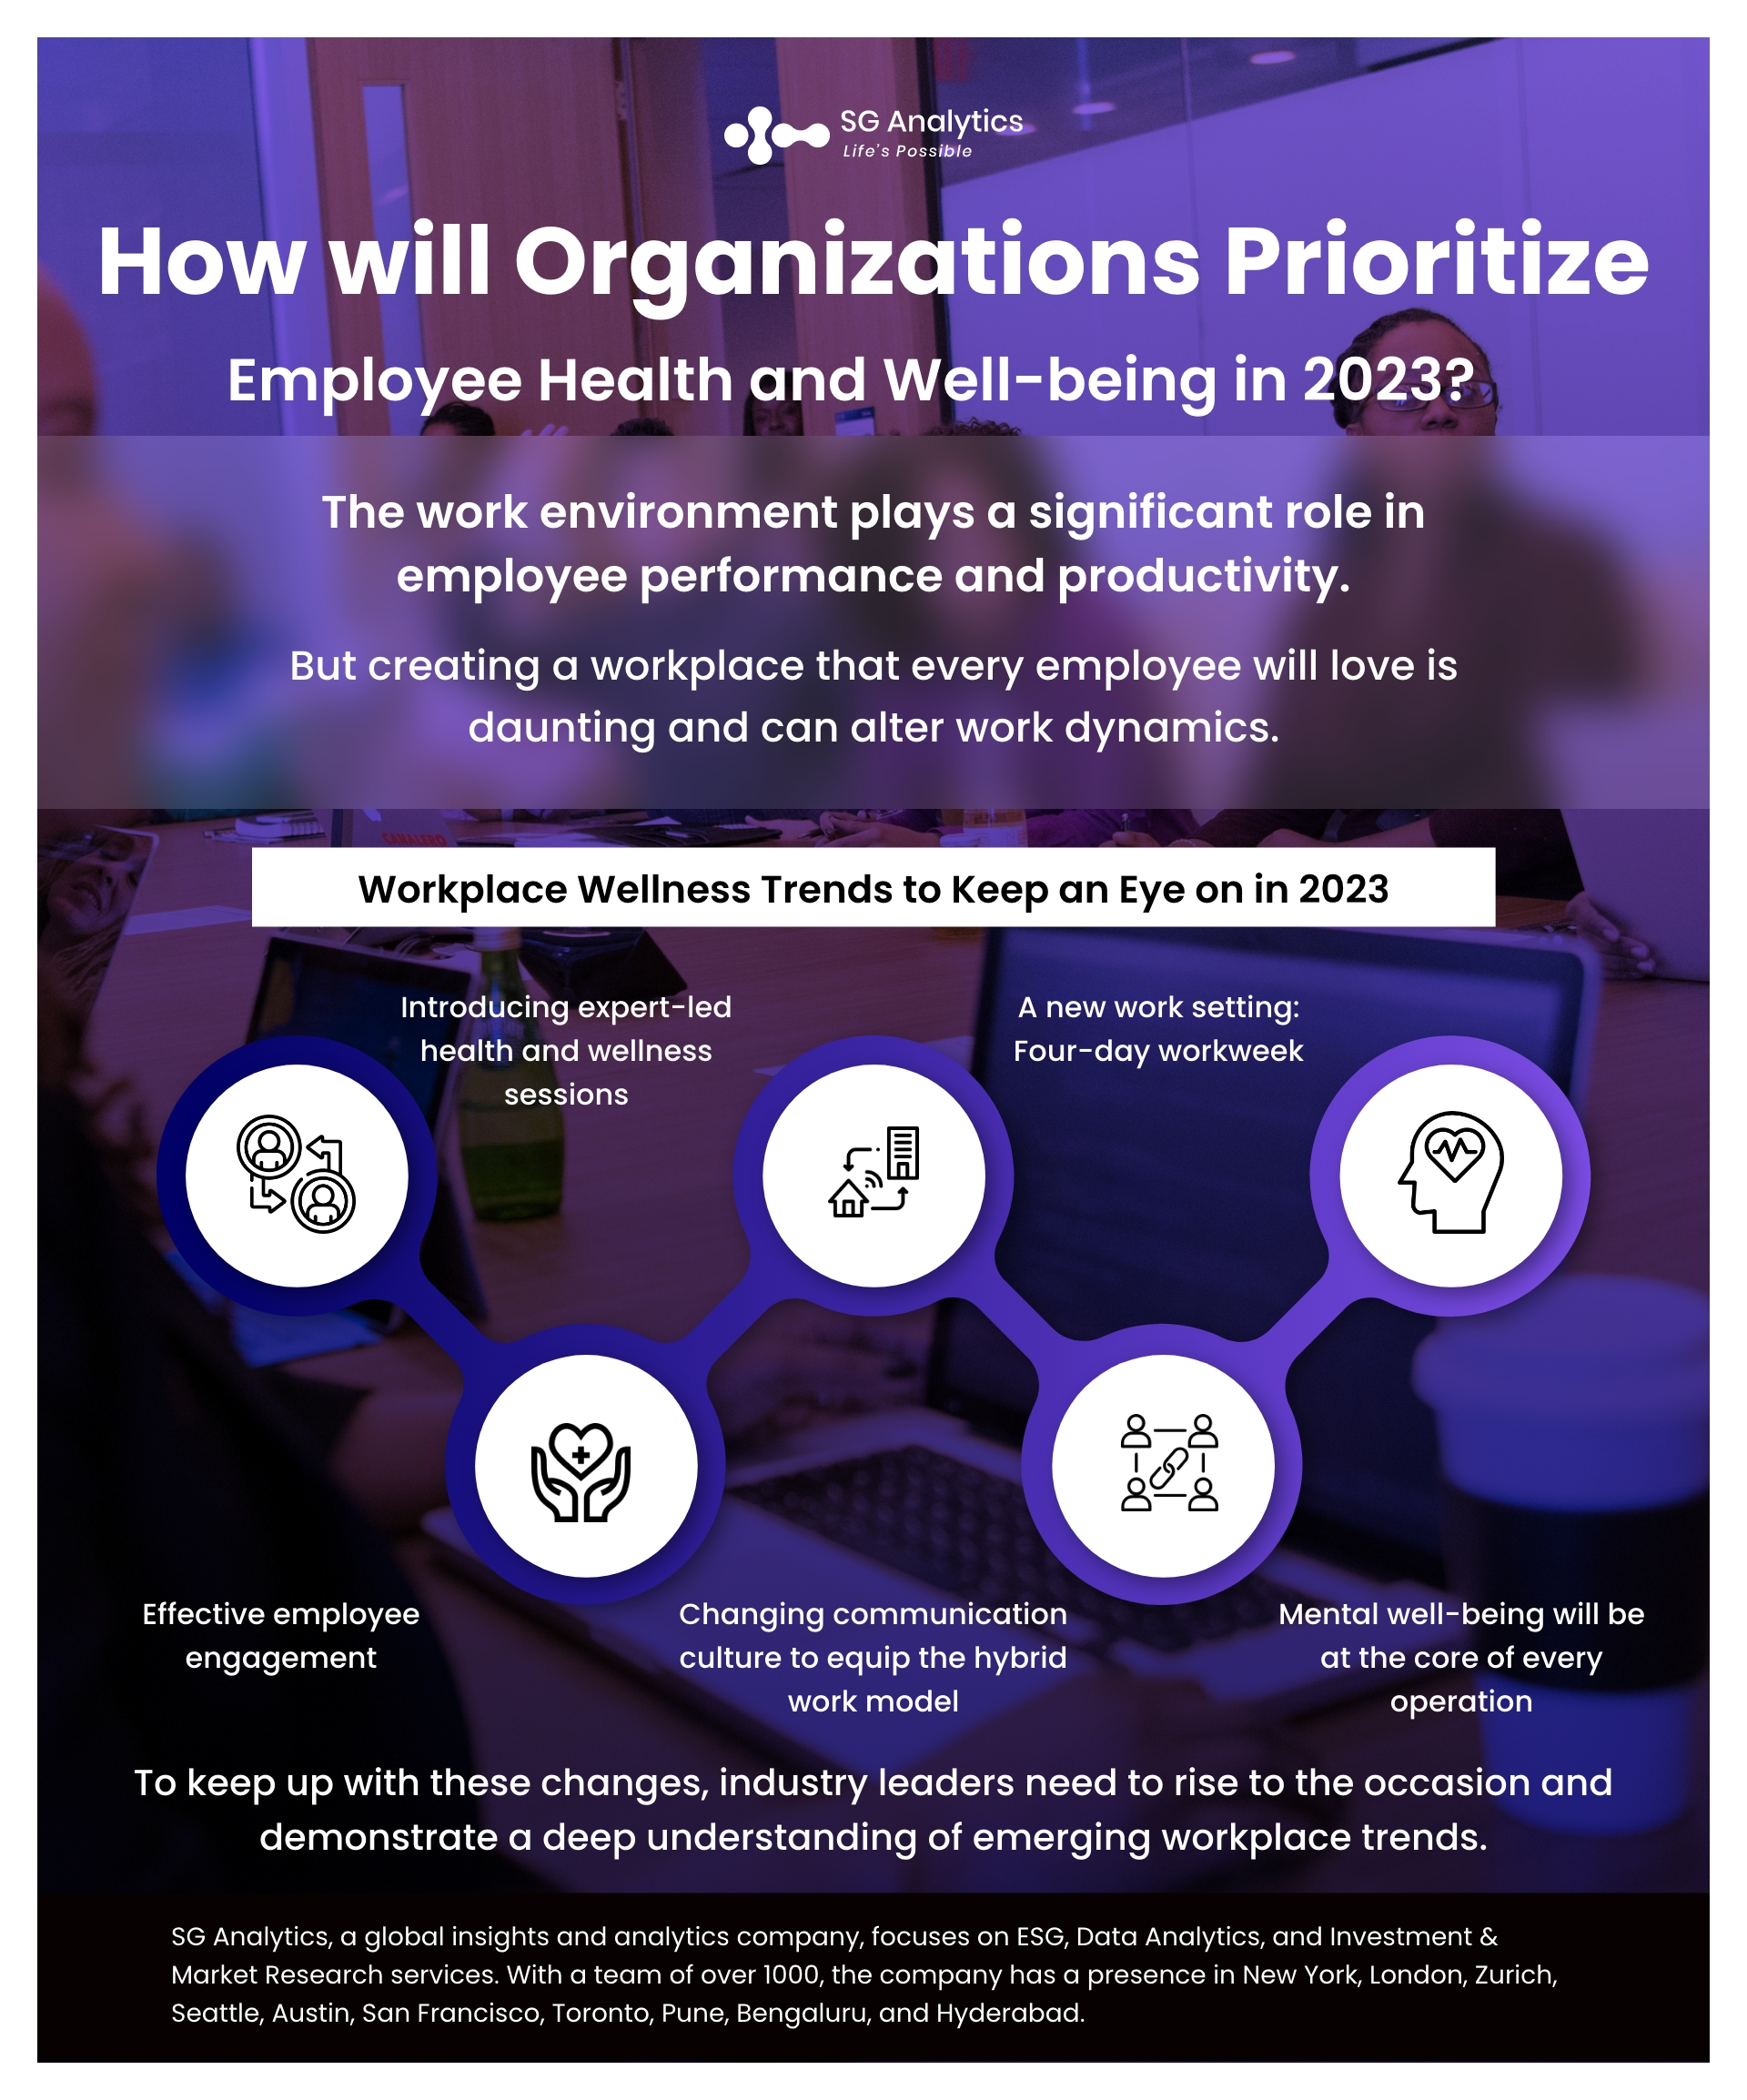 How will Organizations Prioritize Employee Health and Well-being in 2023 